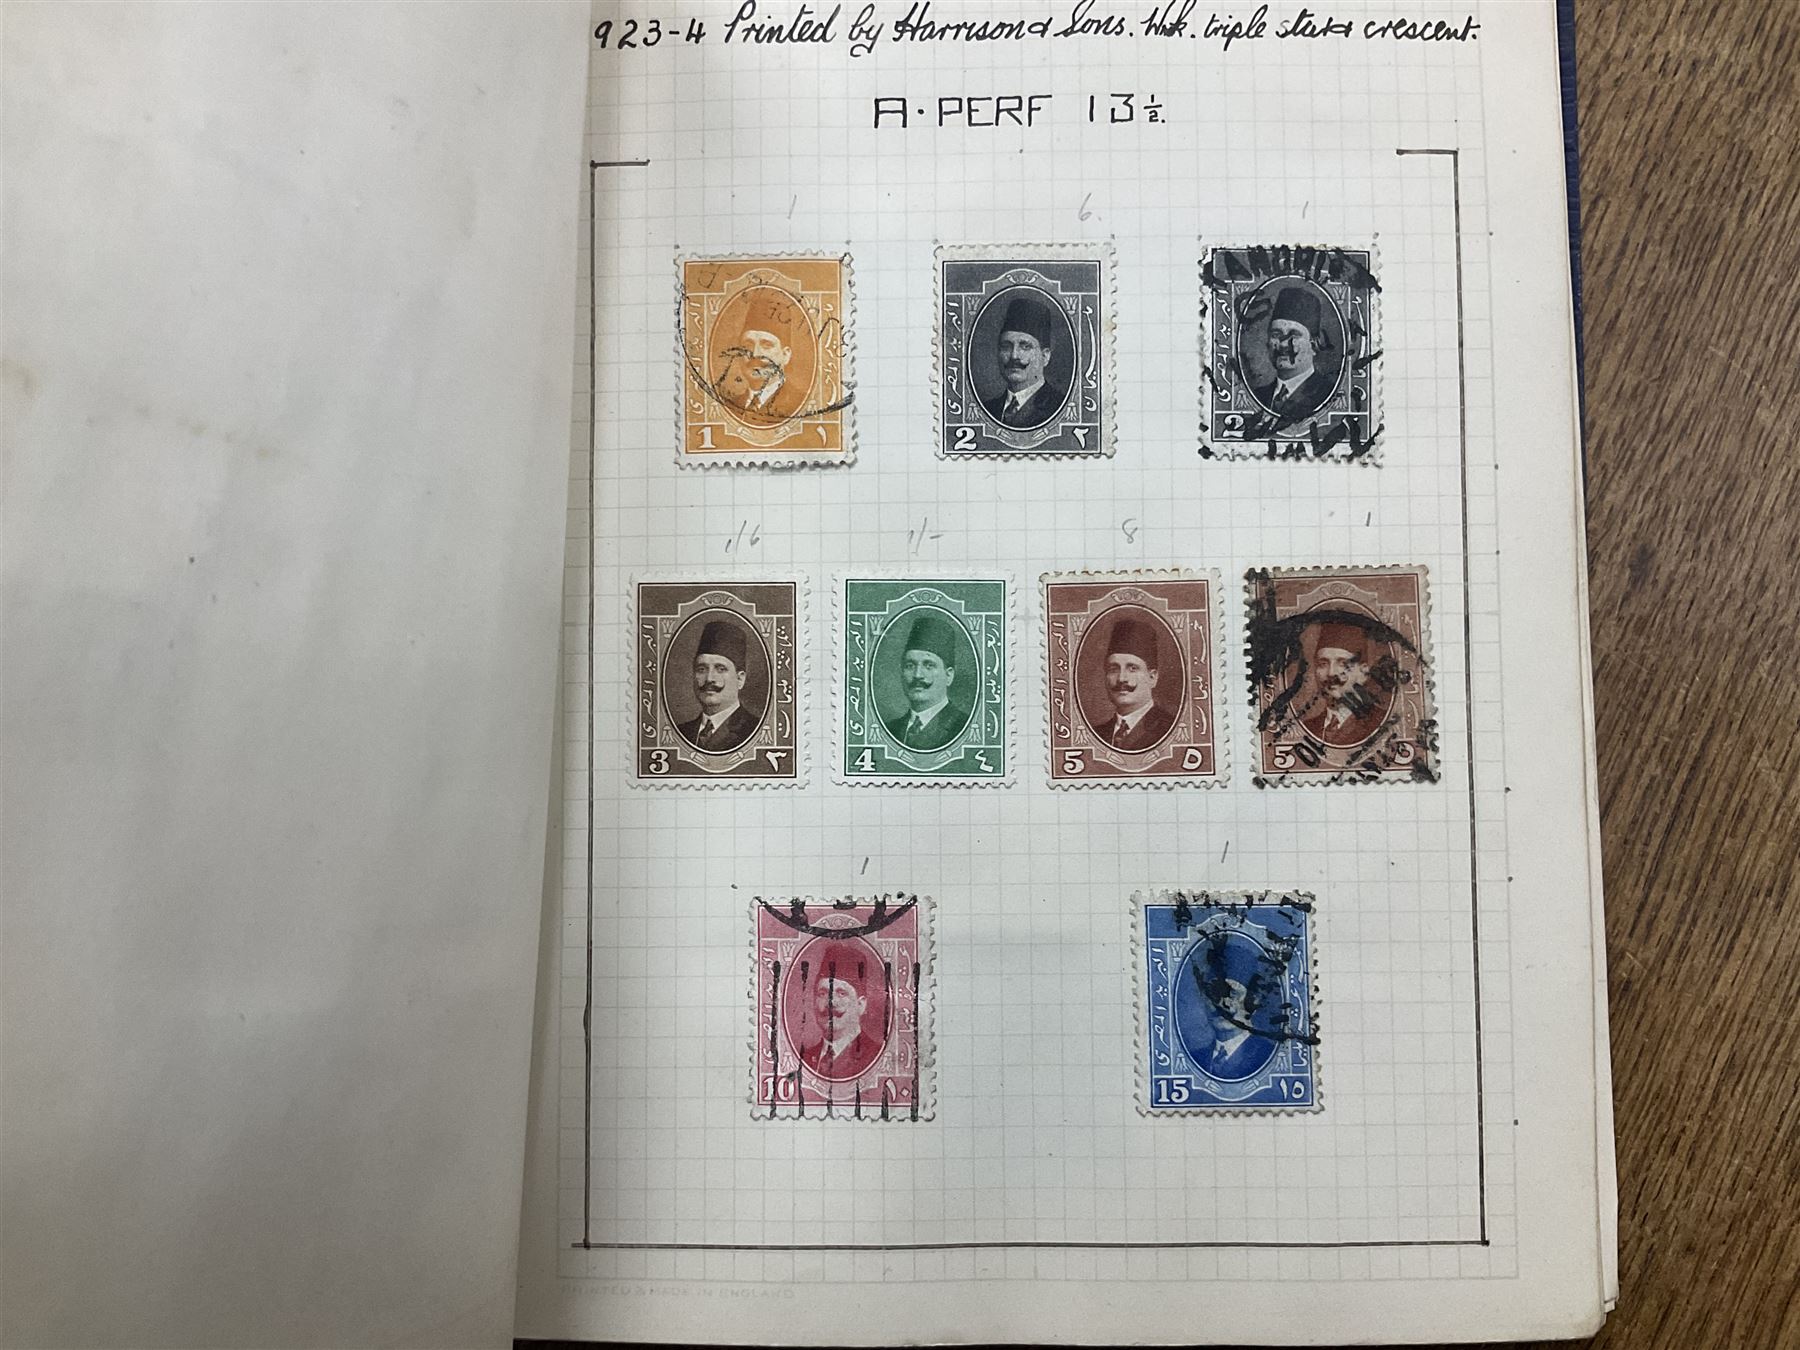 Egypt 1866 and later stamps - Image 212 of 761